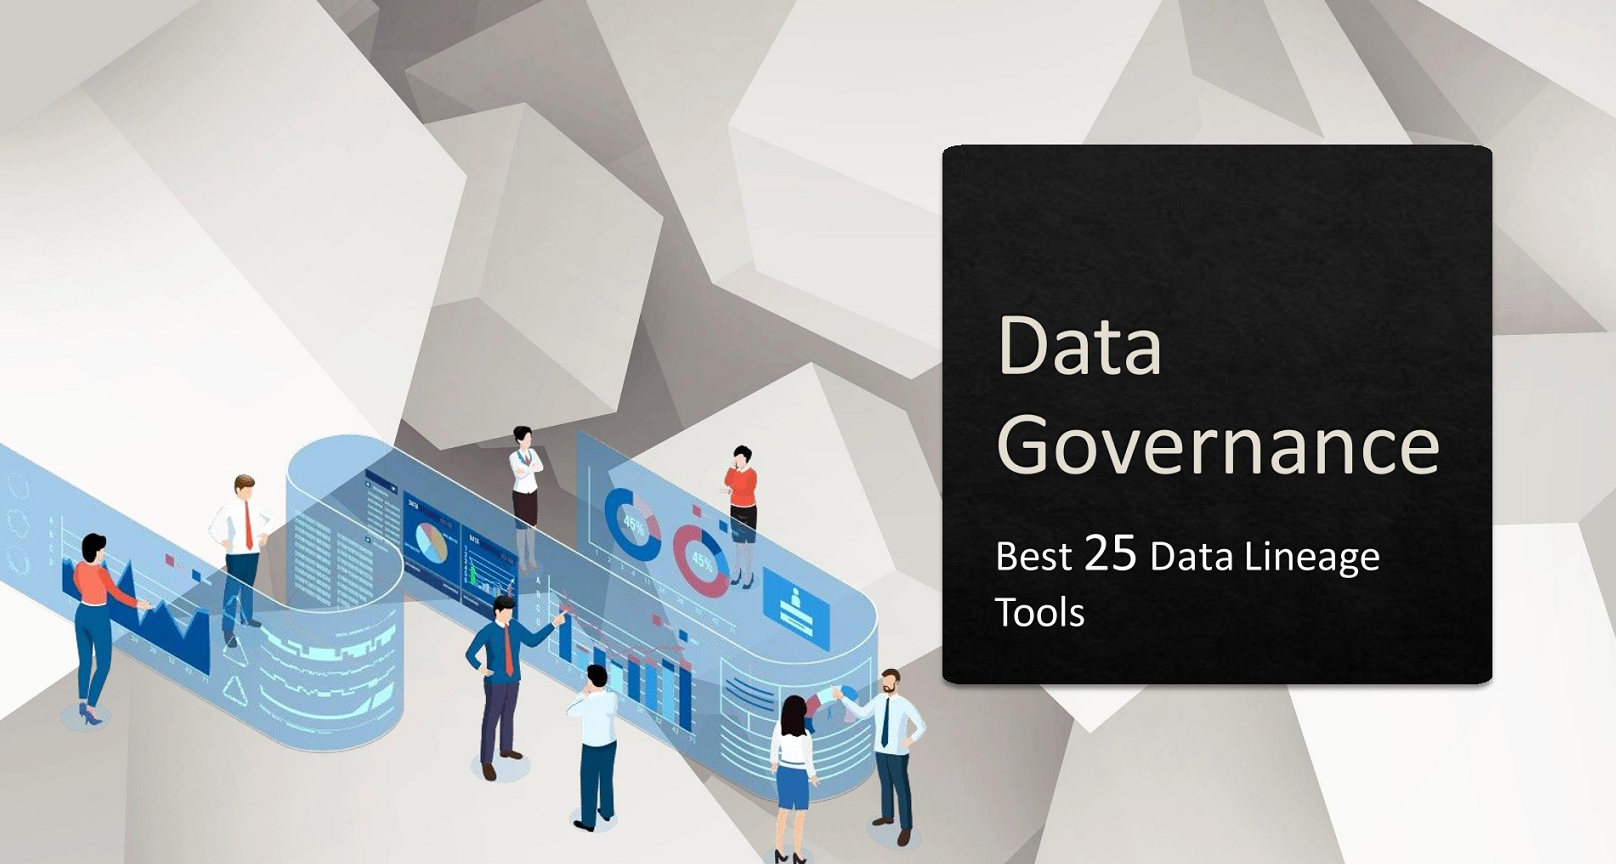 Top 25 Data Lineage tools for Data Governance